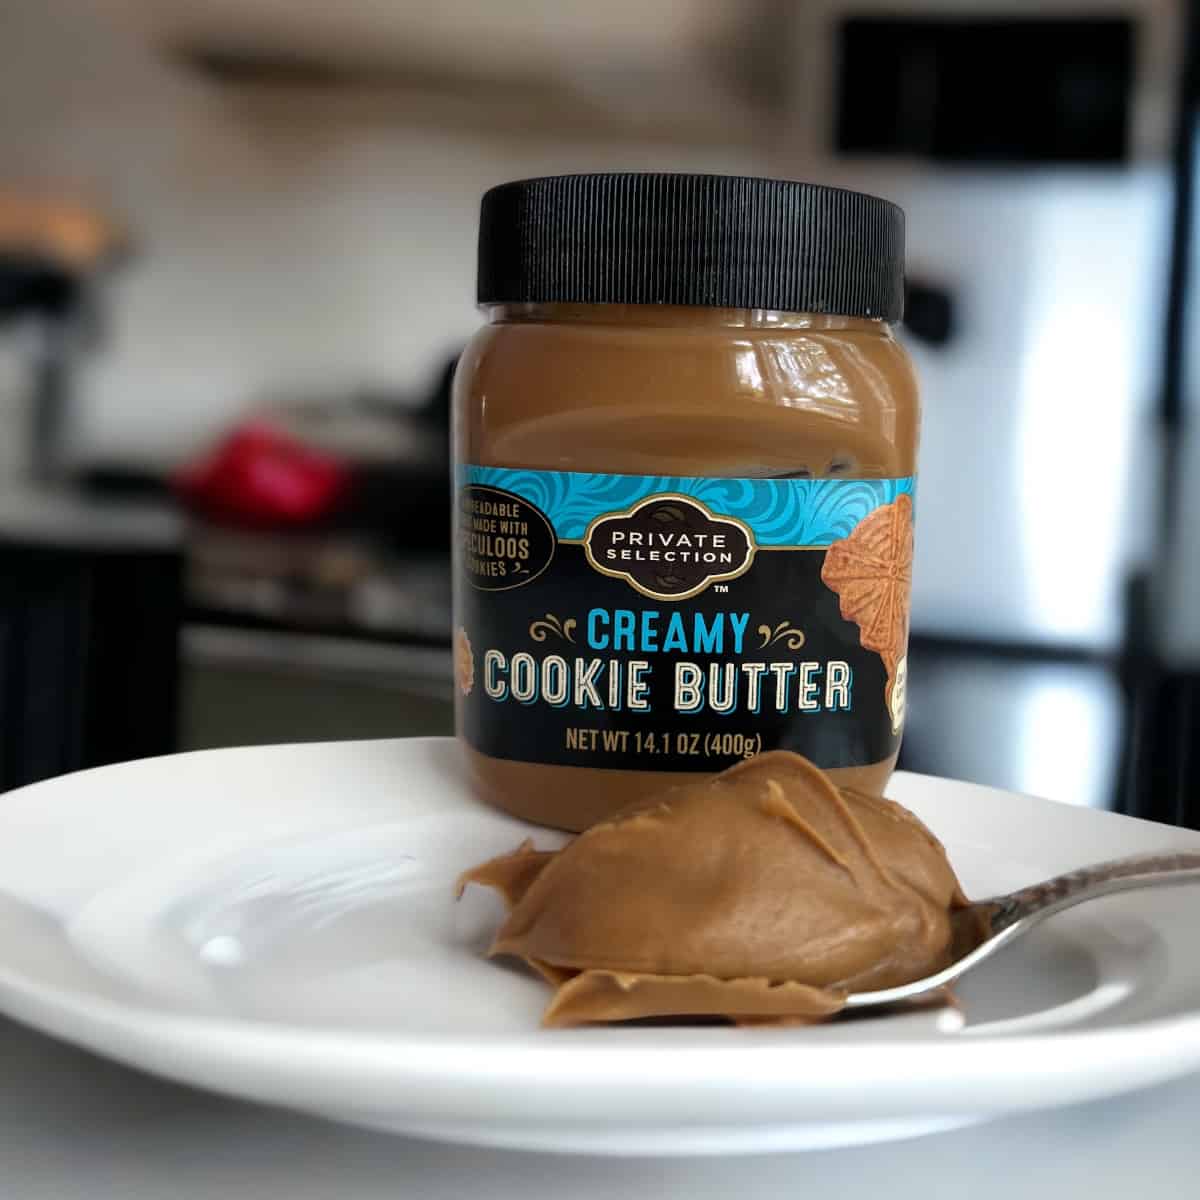 Spoonful of cookie butter in front of jar.